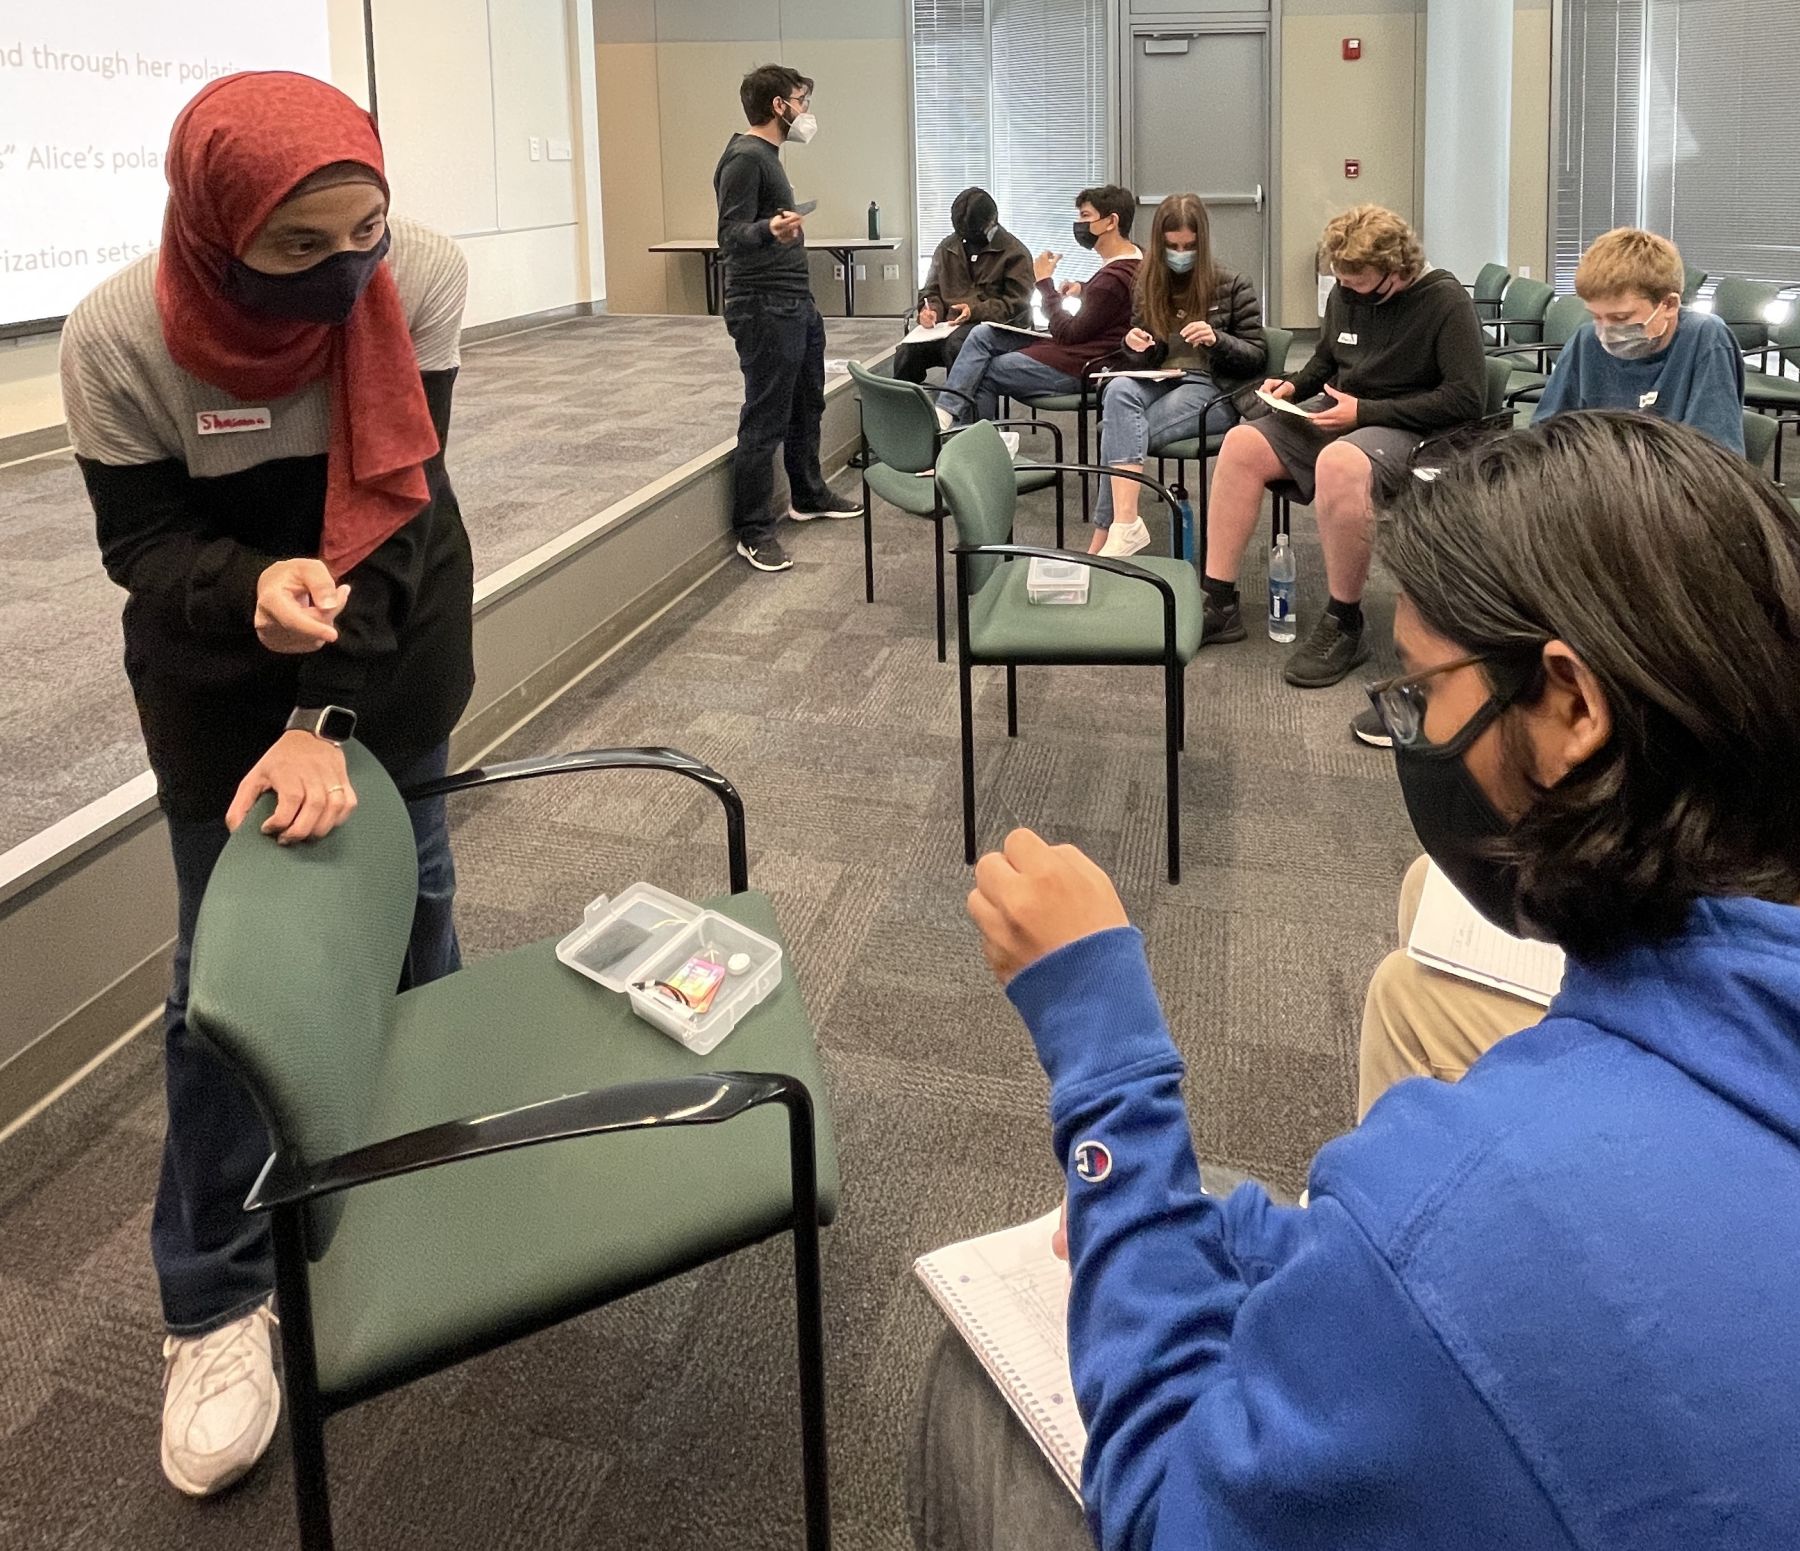 Shaimaa Azzam, postdoctoral researcher, and Kamyar Parto, graduate student, lead students through a lesson on polarization